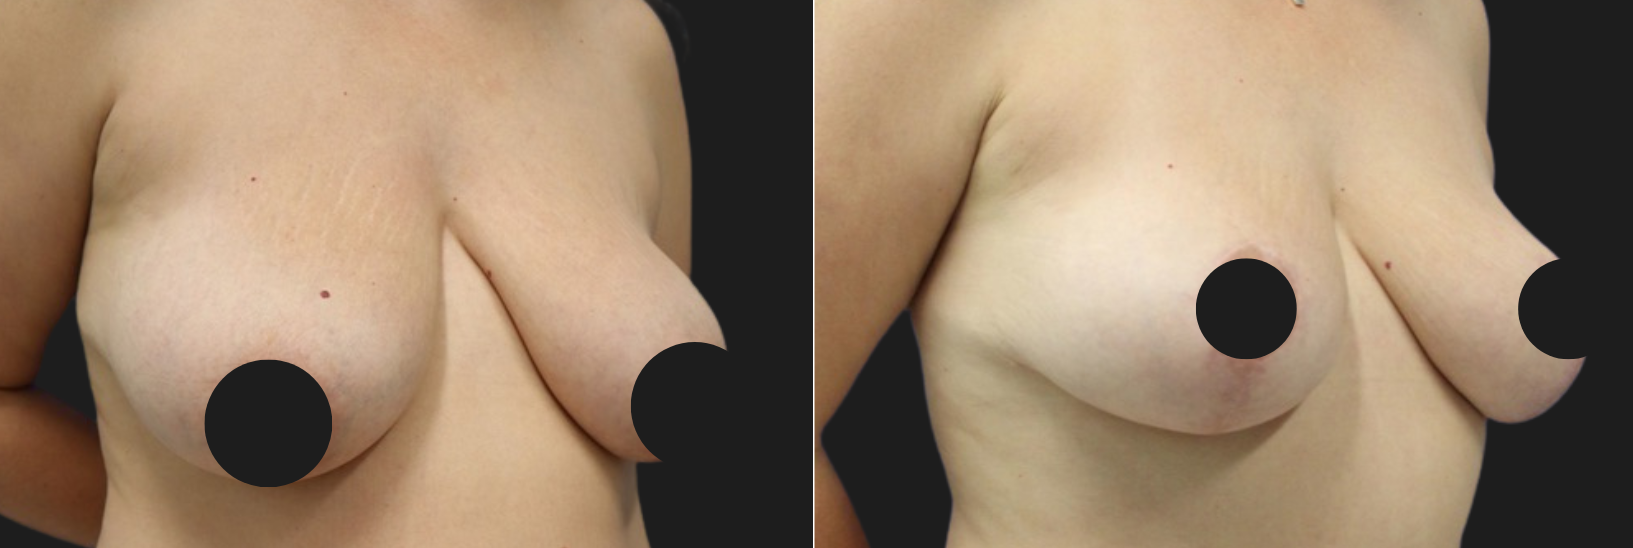 42 year-old before and 7 months after Mommy Makeover: Tummy Tuck, Flank Liposuction, Breast Lift, Hernia Repair